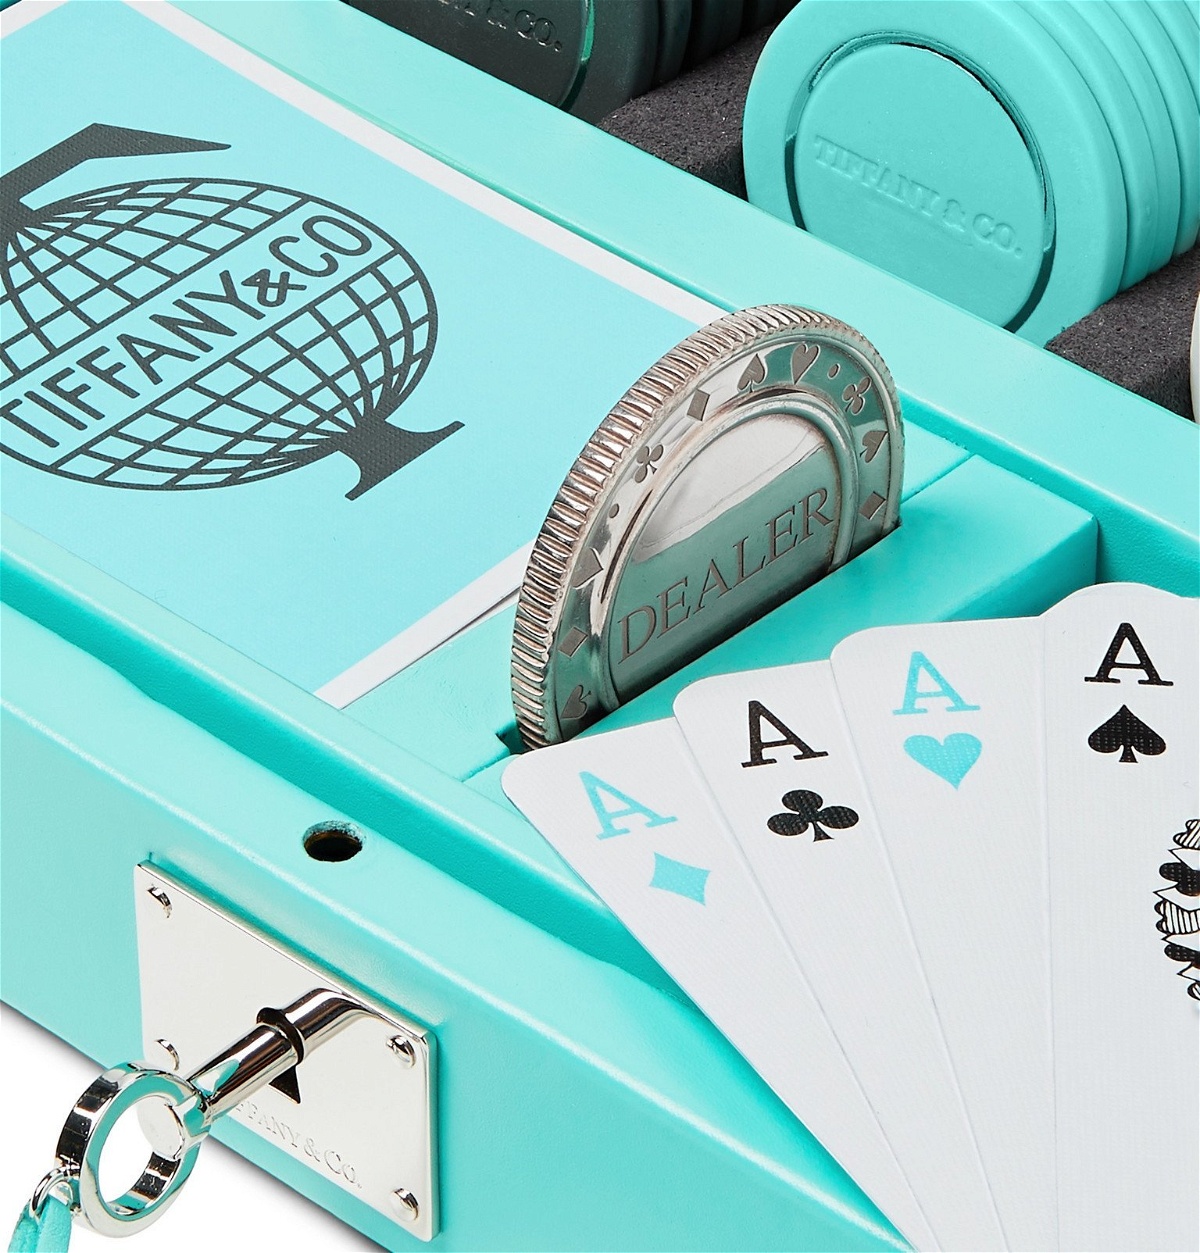 Cancelled - Tiffany & Co. Poker Set for sale or trade